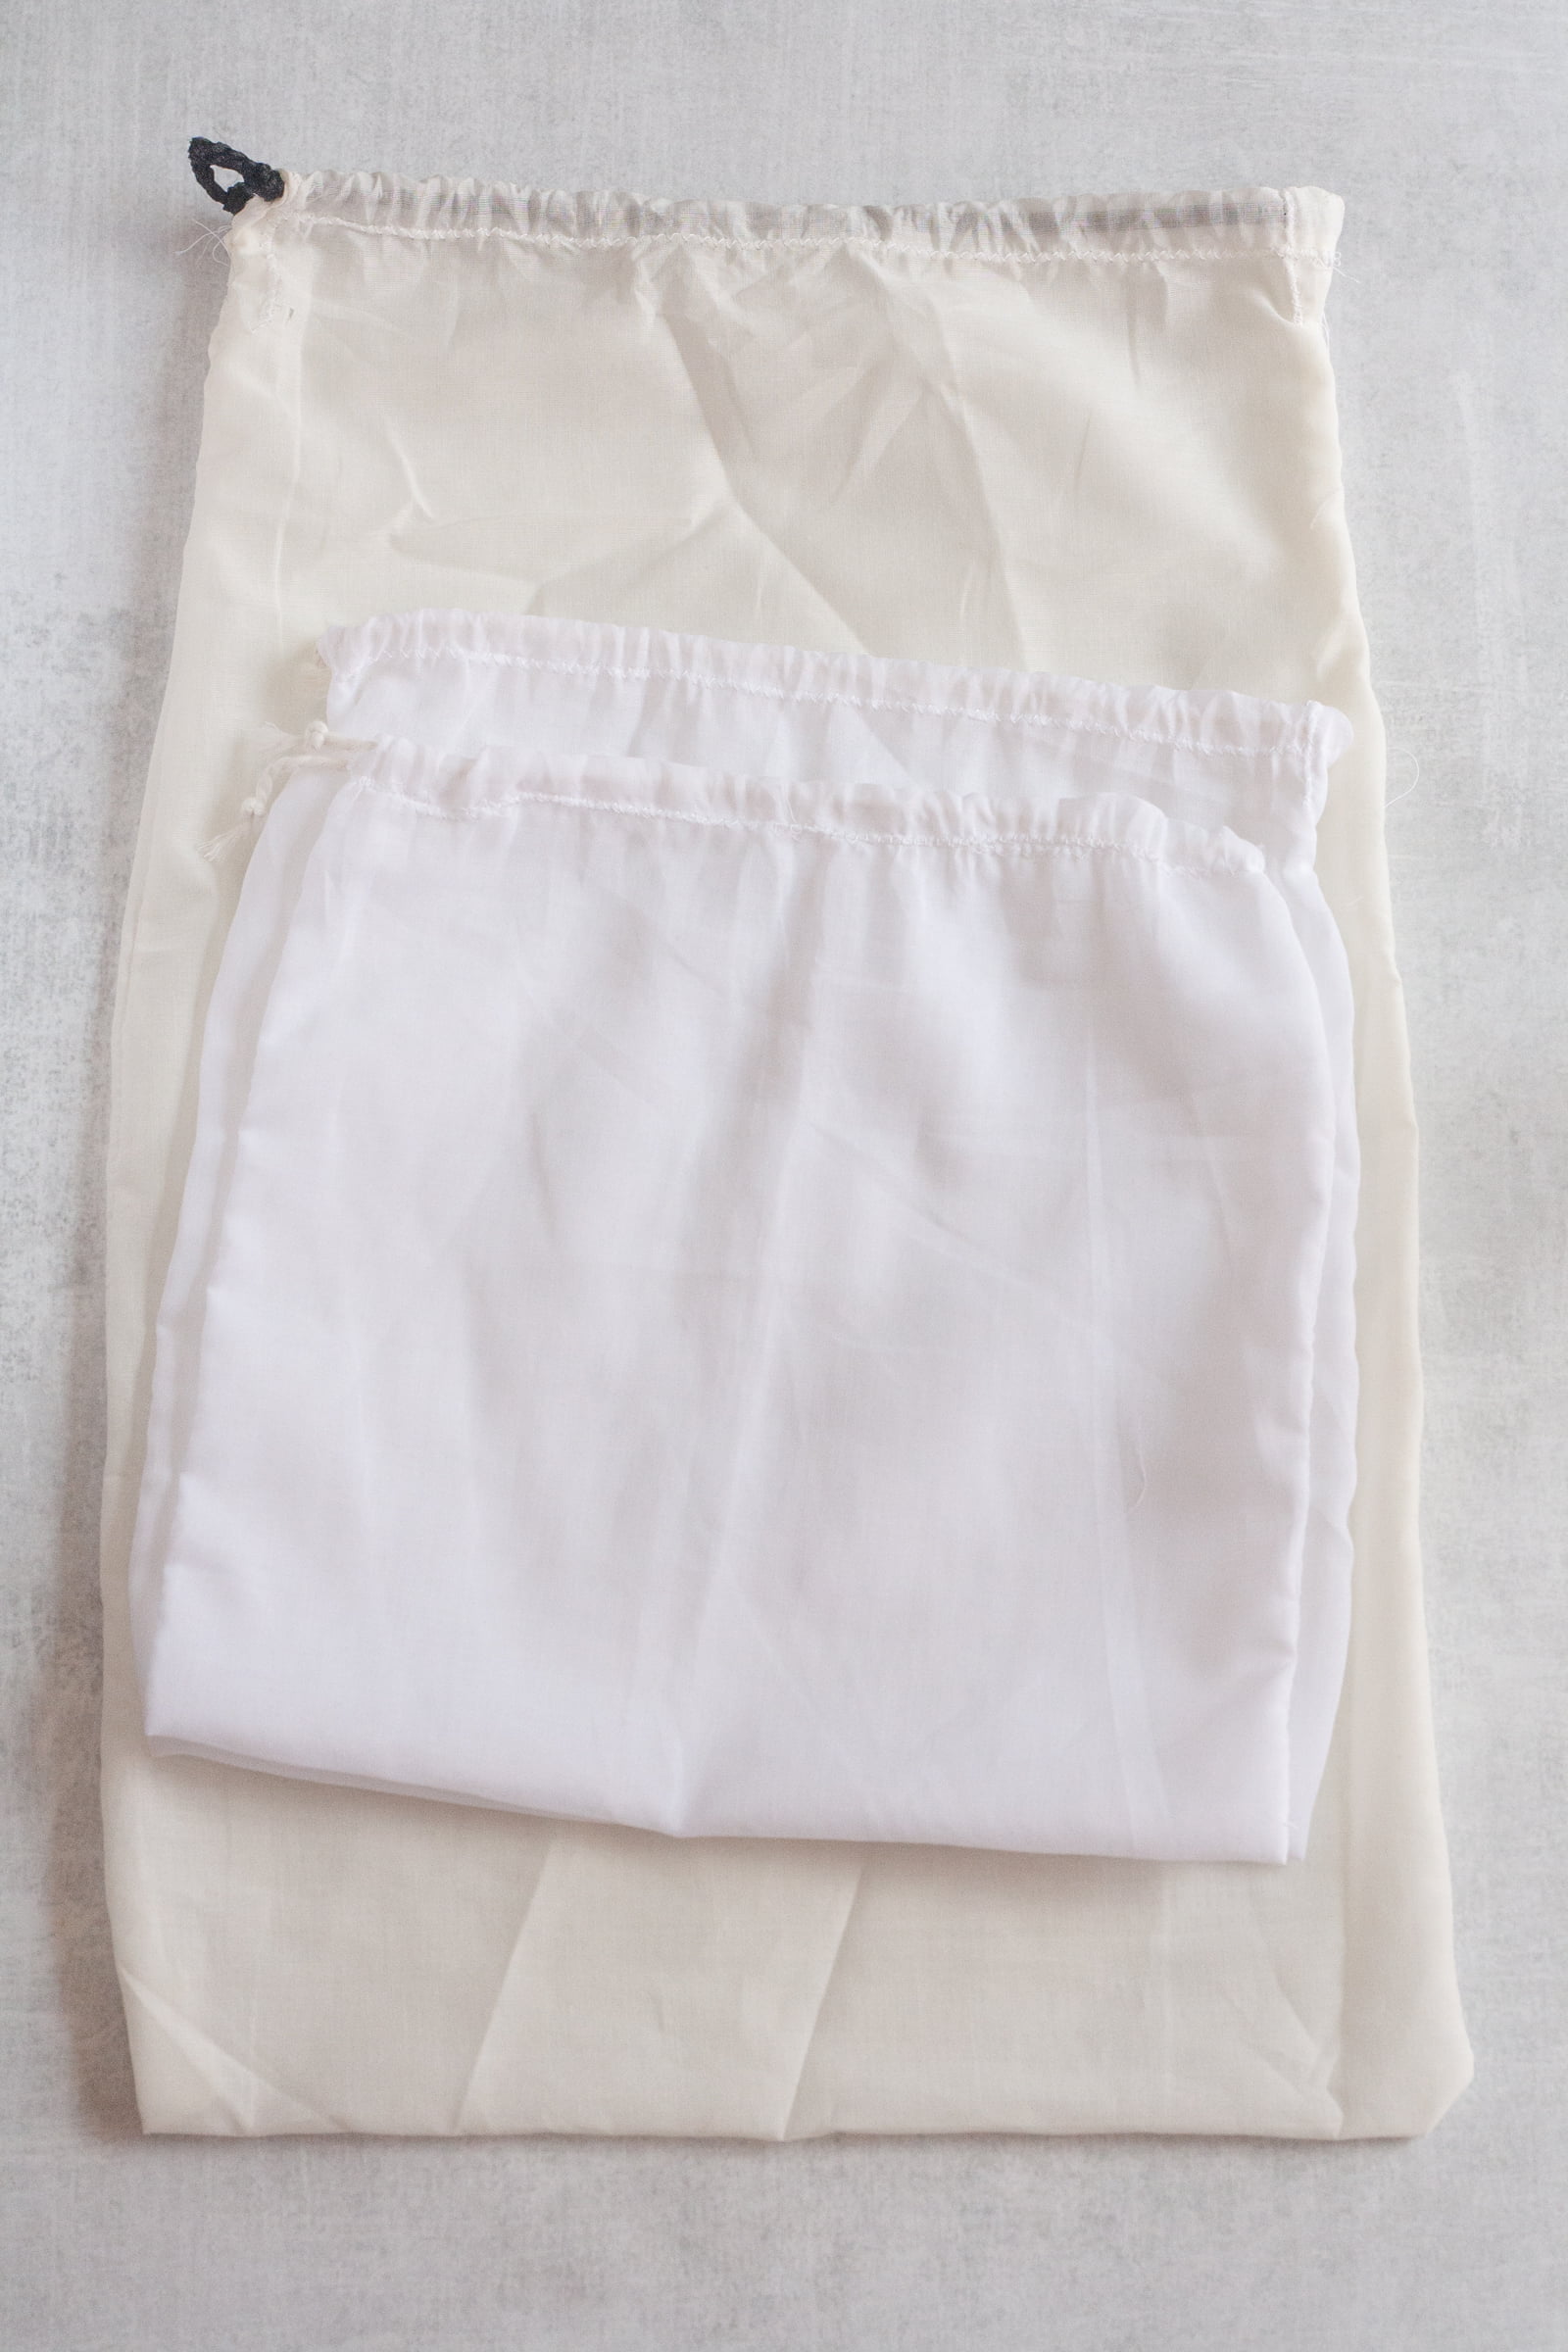 Three cotton voile drawstring bags stacked on top of each other